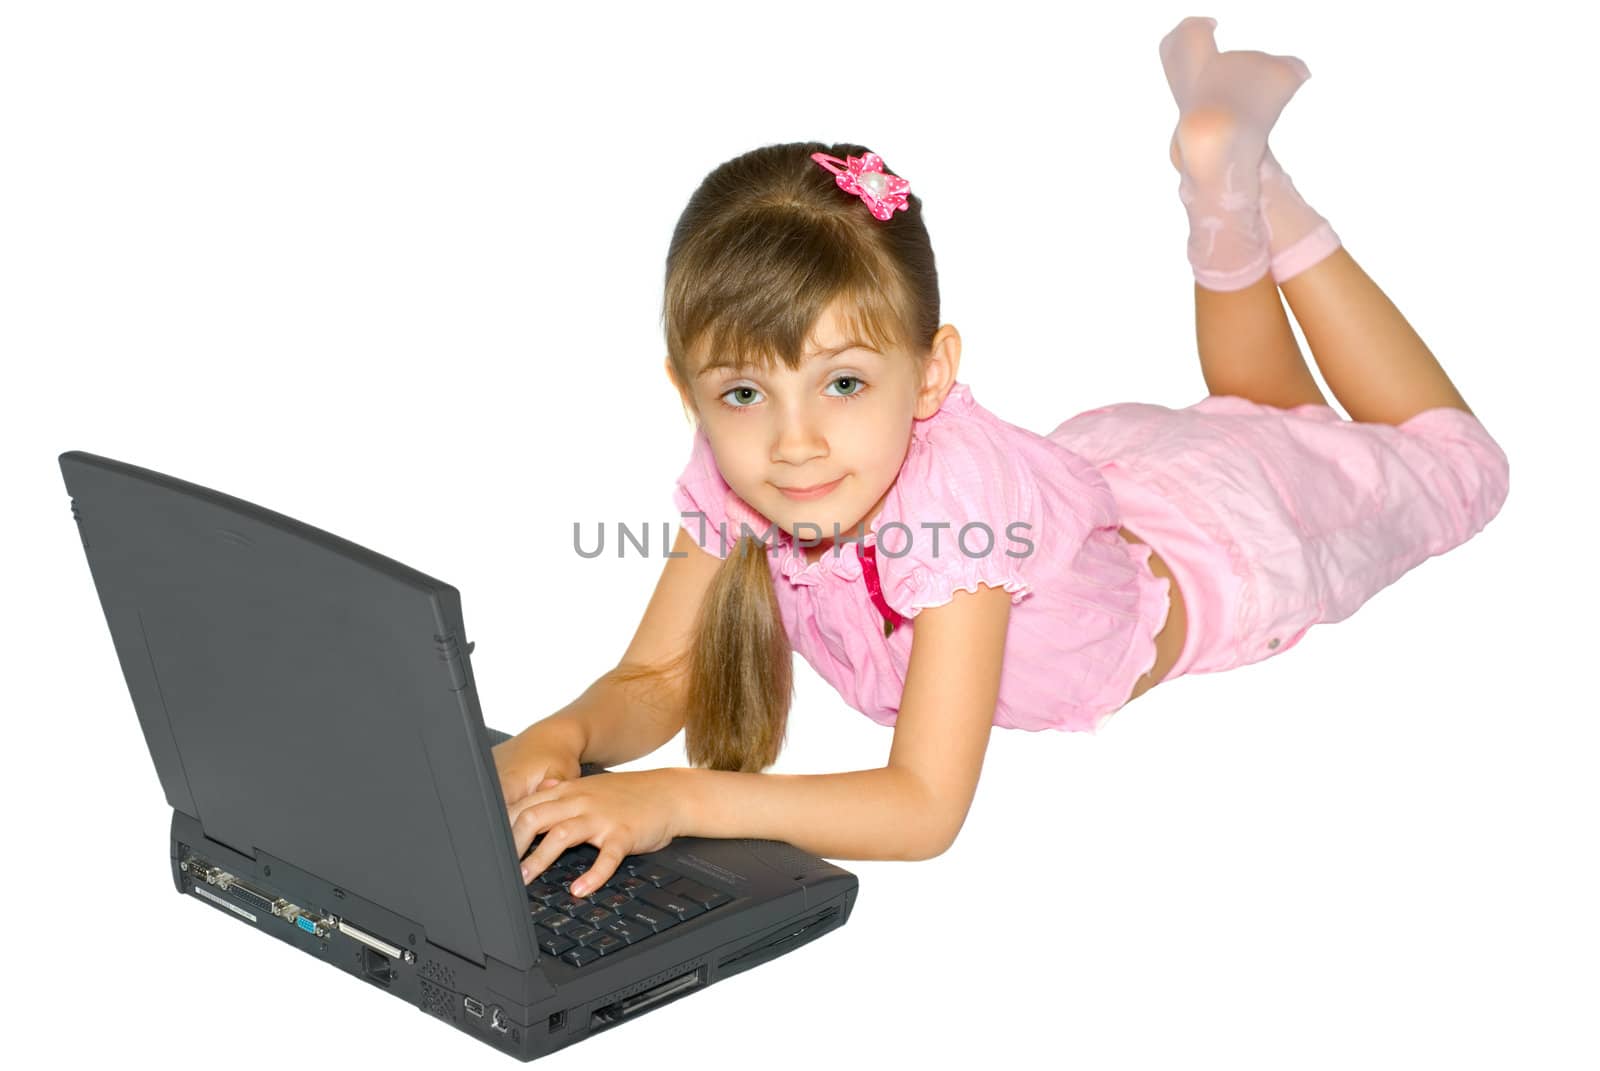 The girl in pink clothes lays near a notebook computer